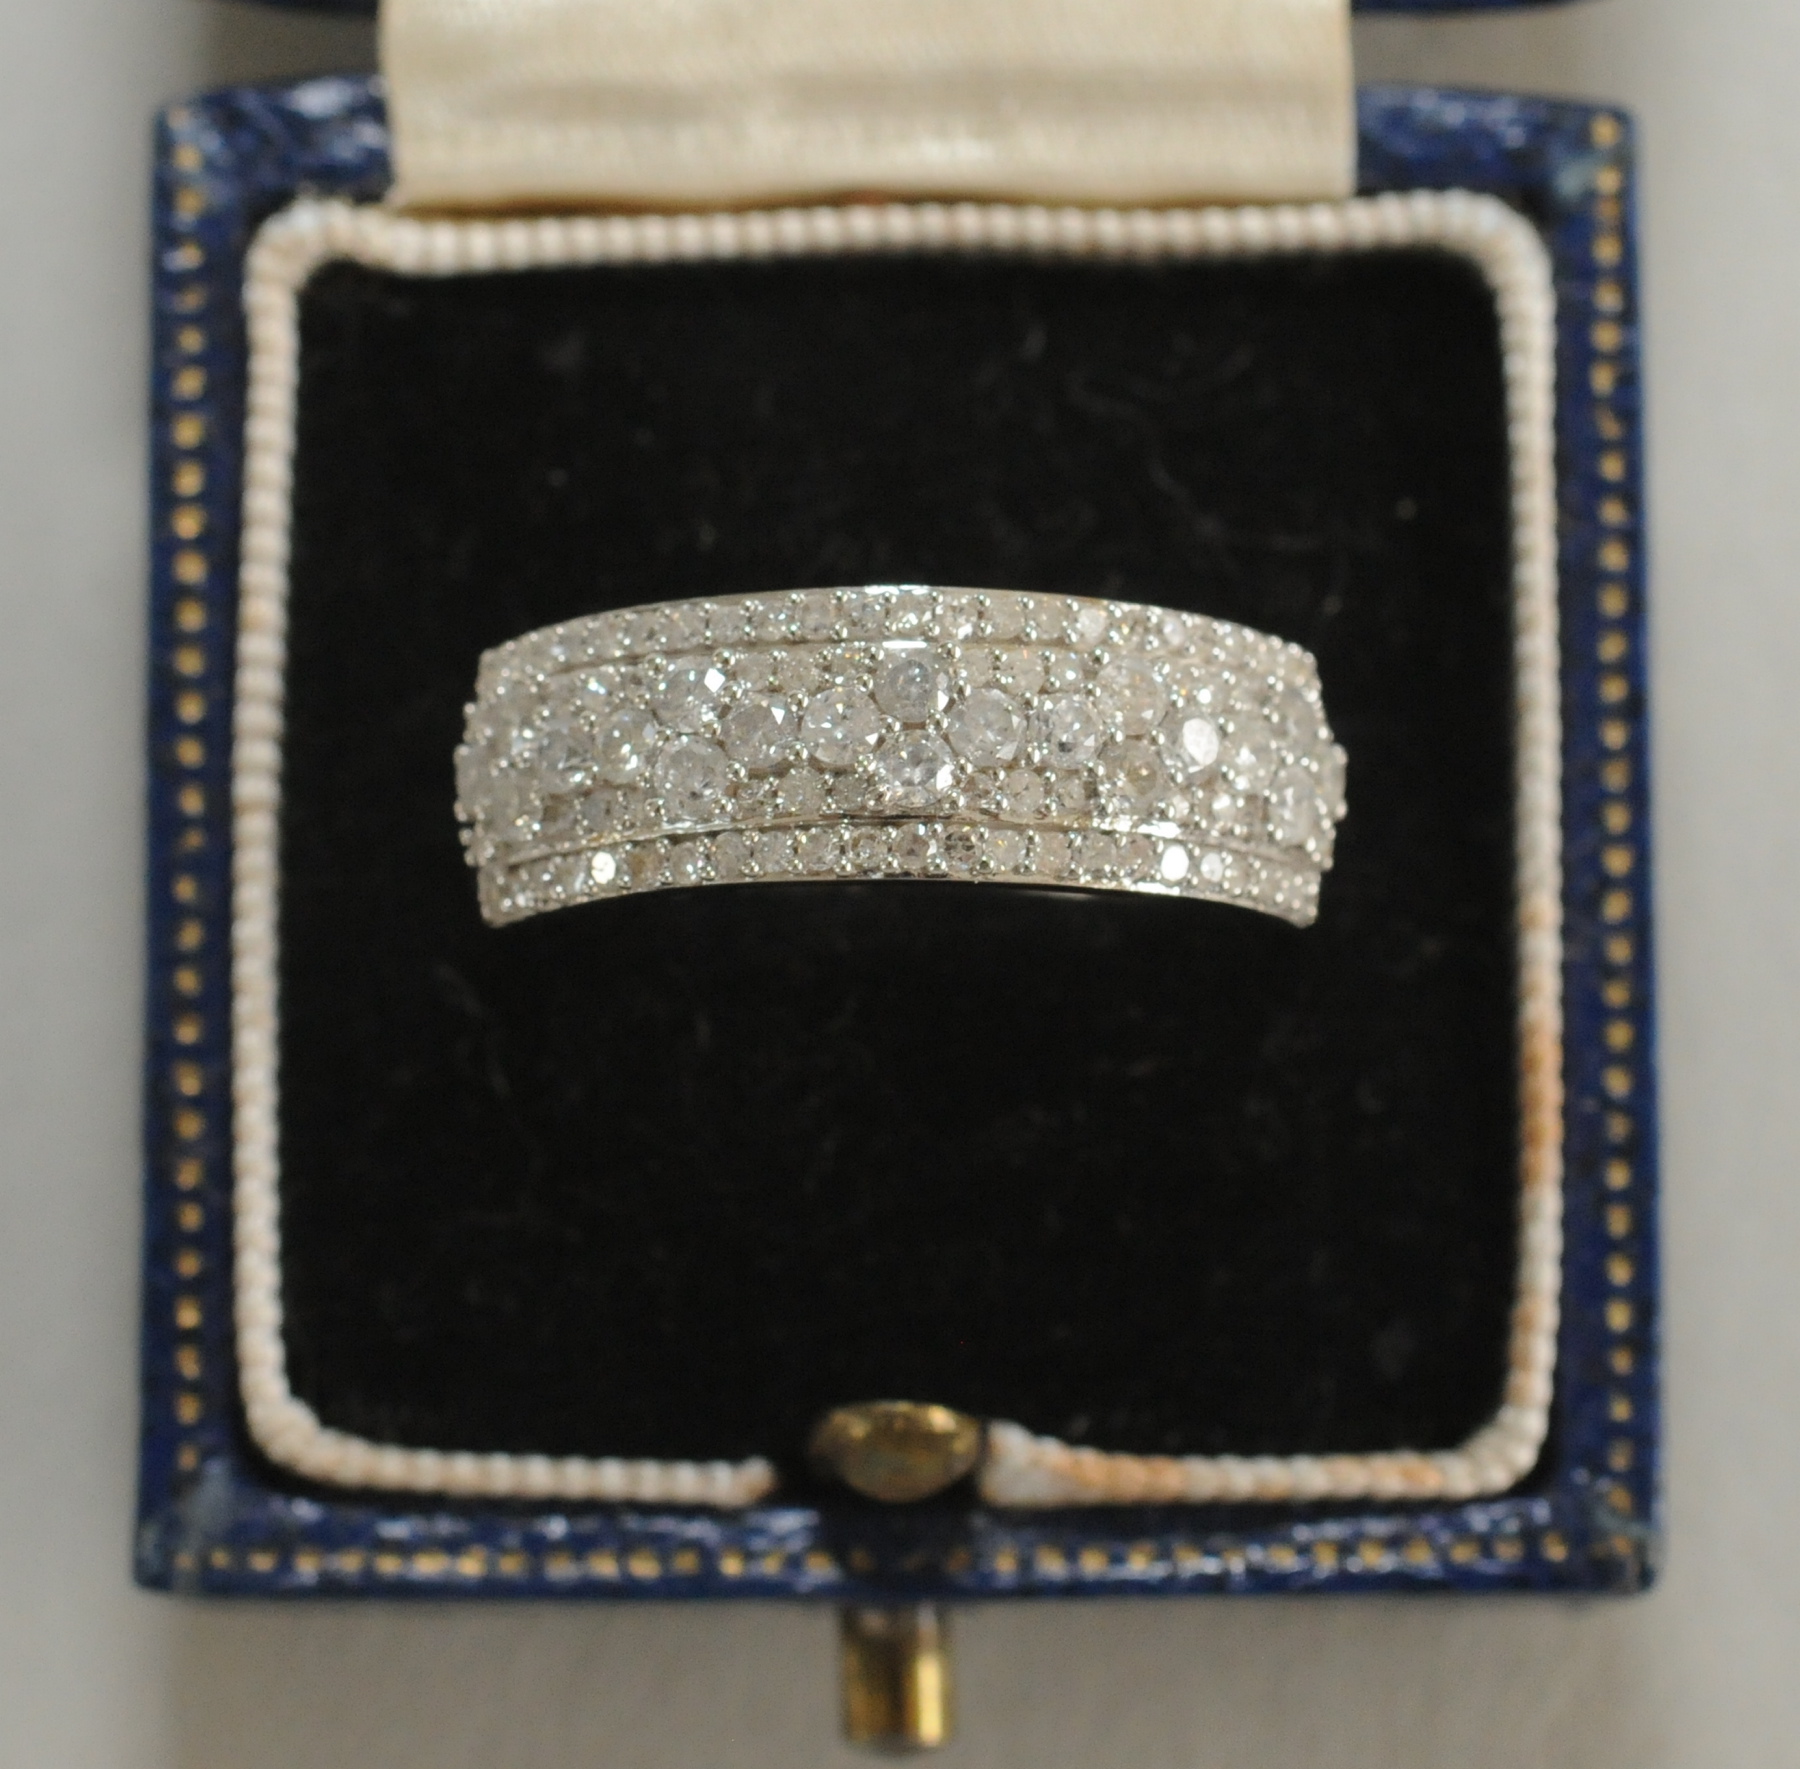 Diamond ring with four rows of pavé set mixed cut brilliants, pavé set in 9ct gold.